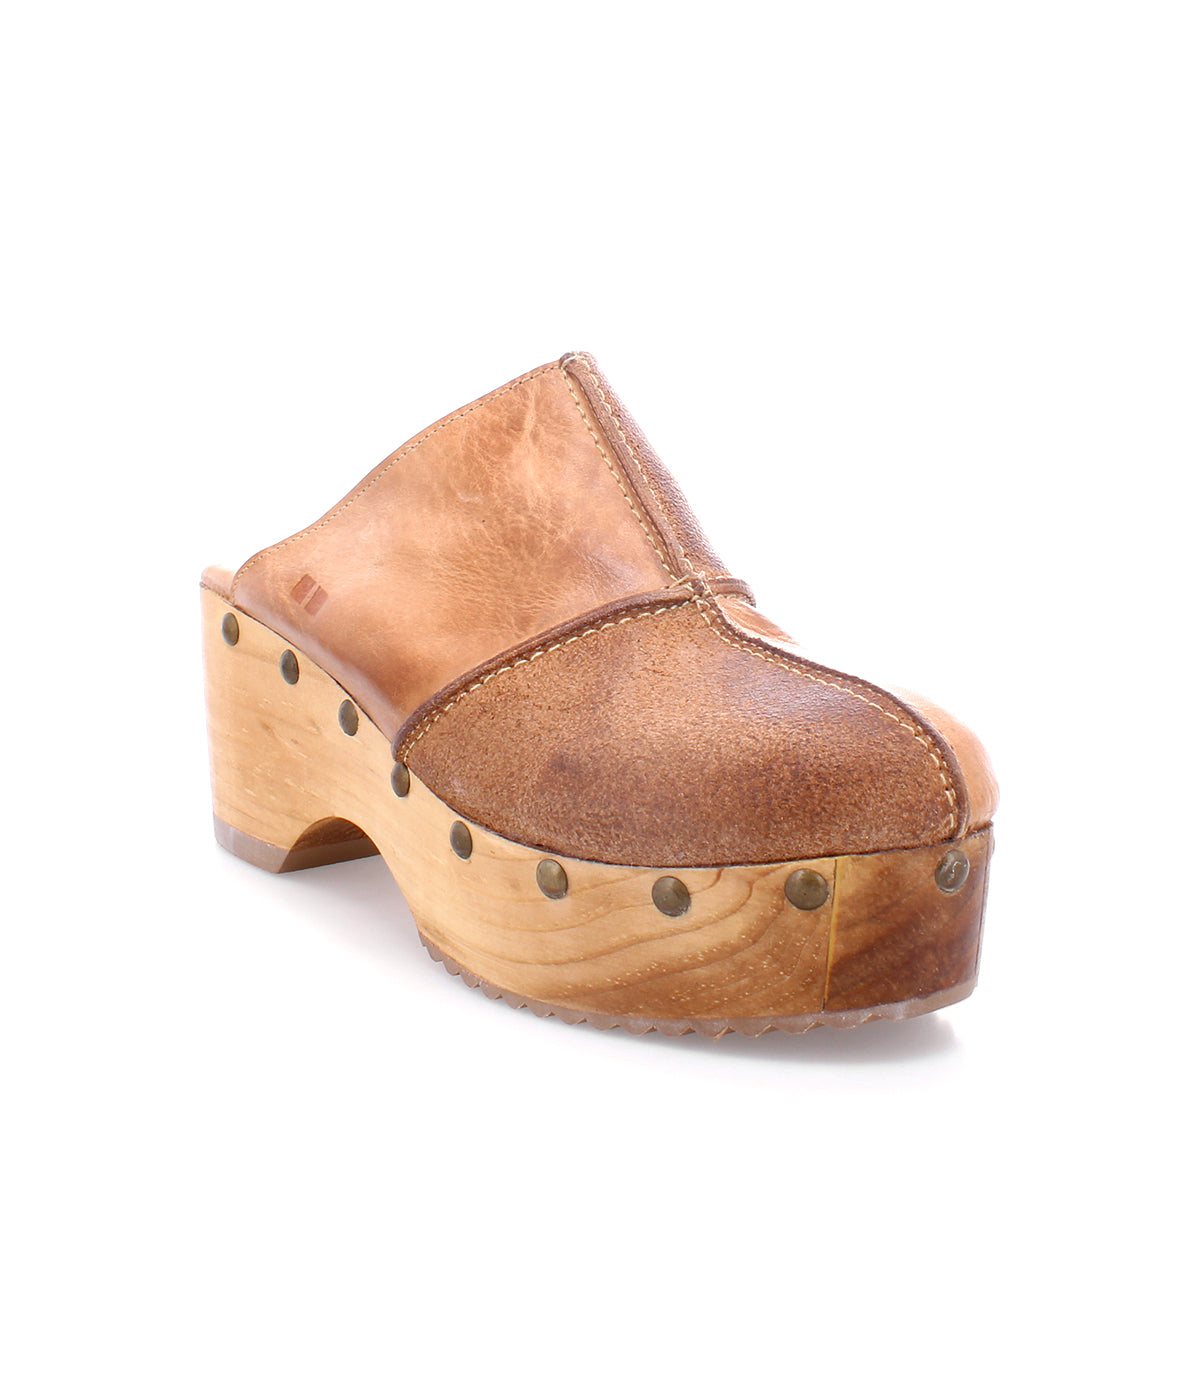 A sustainable women's Bed Stu Mista wood clog.